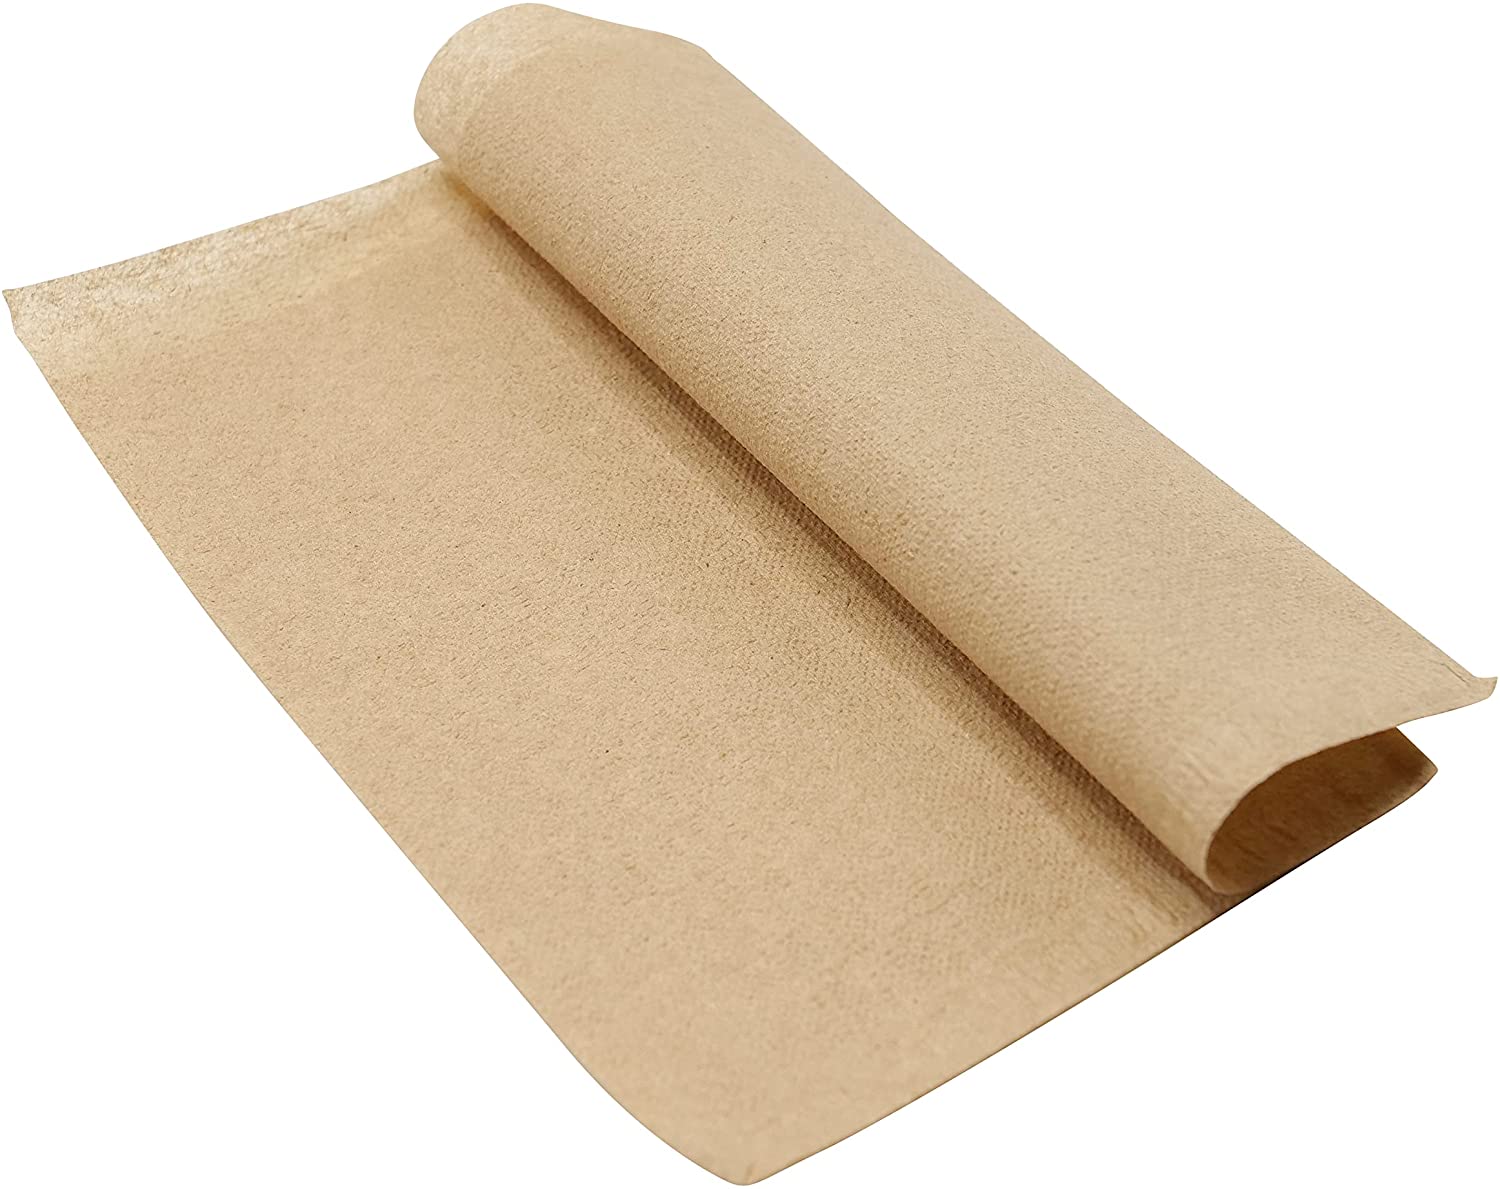 Kraft Single Fold - 1 Ply Single Fold Paper Towels - 10-1/4 x 9.10 inch - Great for Restaurants, Offices, Bars, Industrial - Recyclable Paper Towels